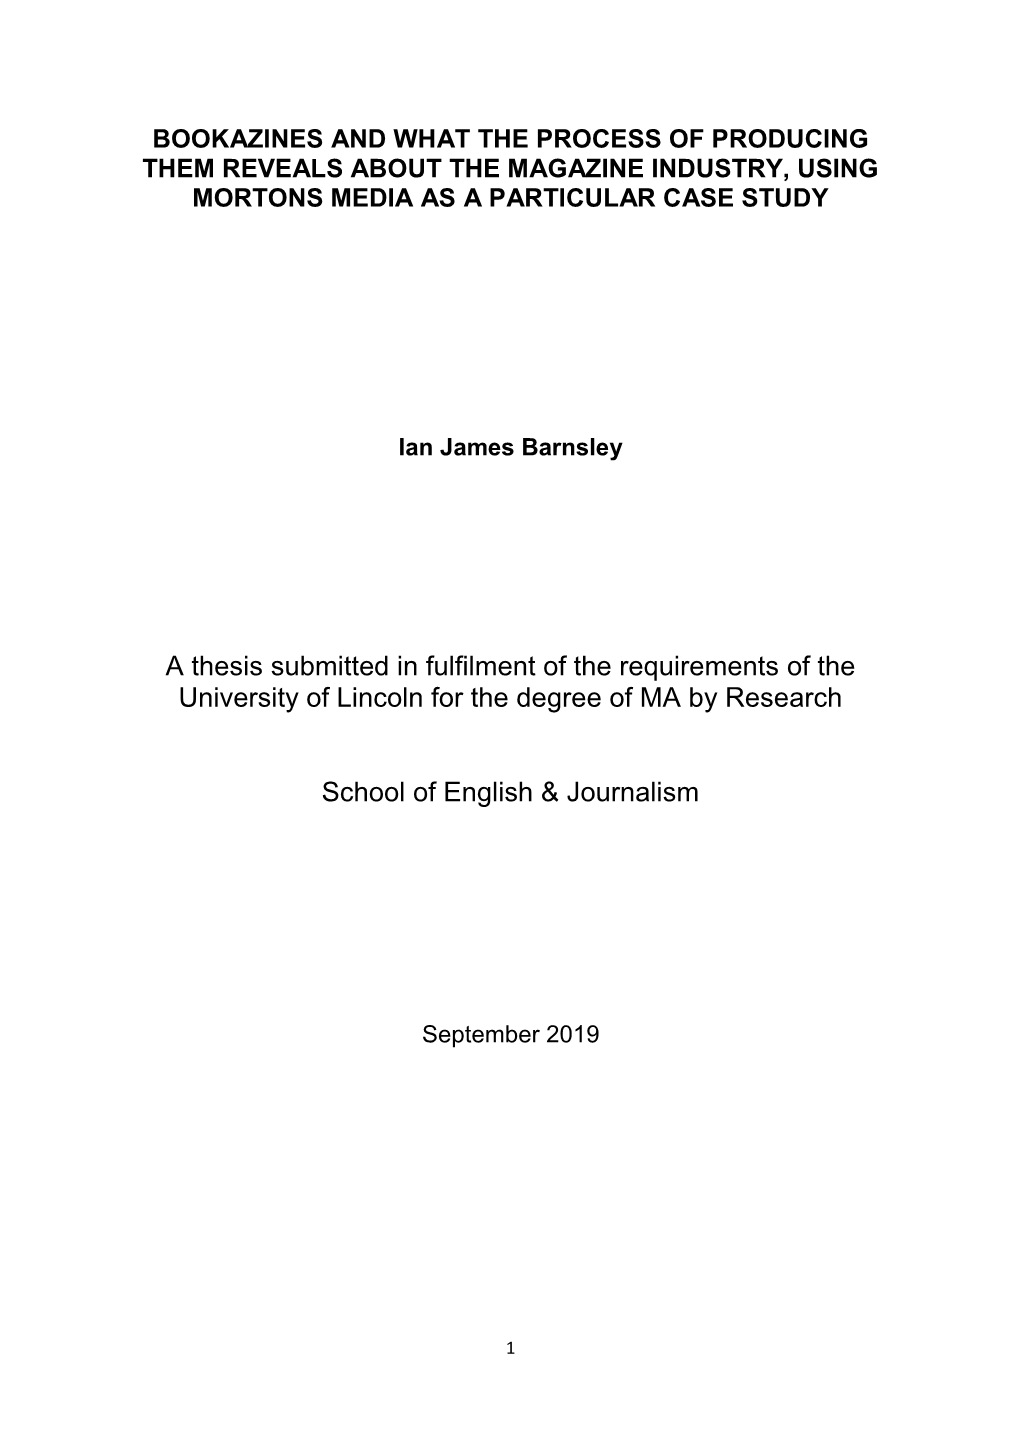 A Thesis Submitted in Fulfilment of the Requirements of the University of Lincoln for the Degree of MA by Research